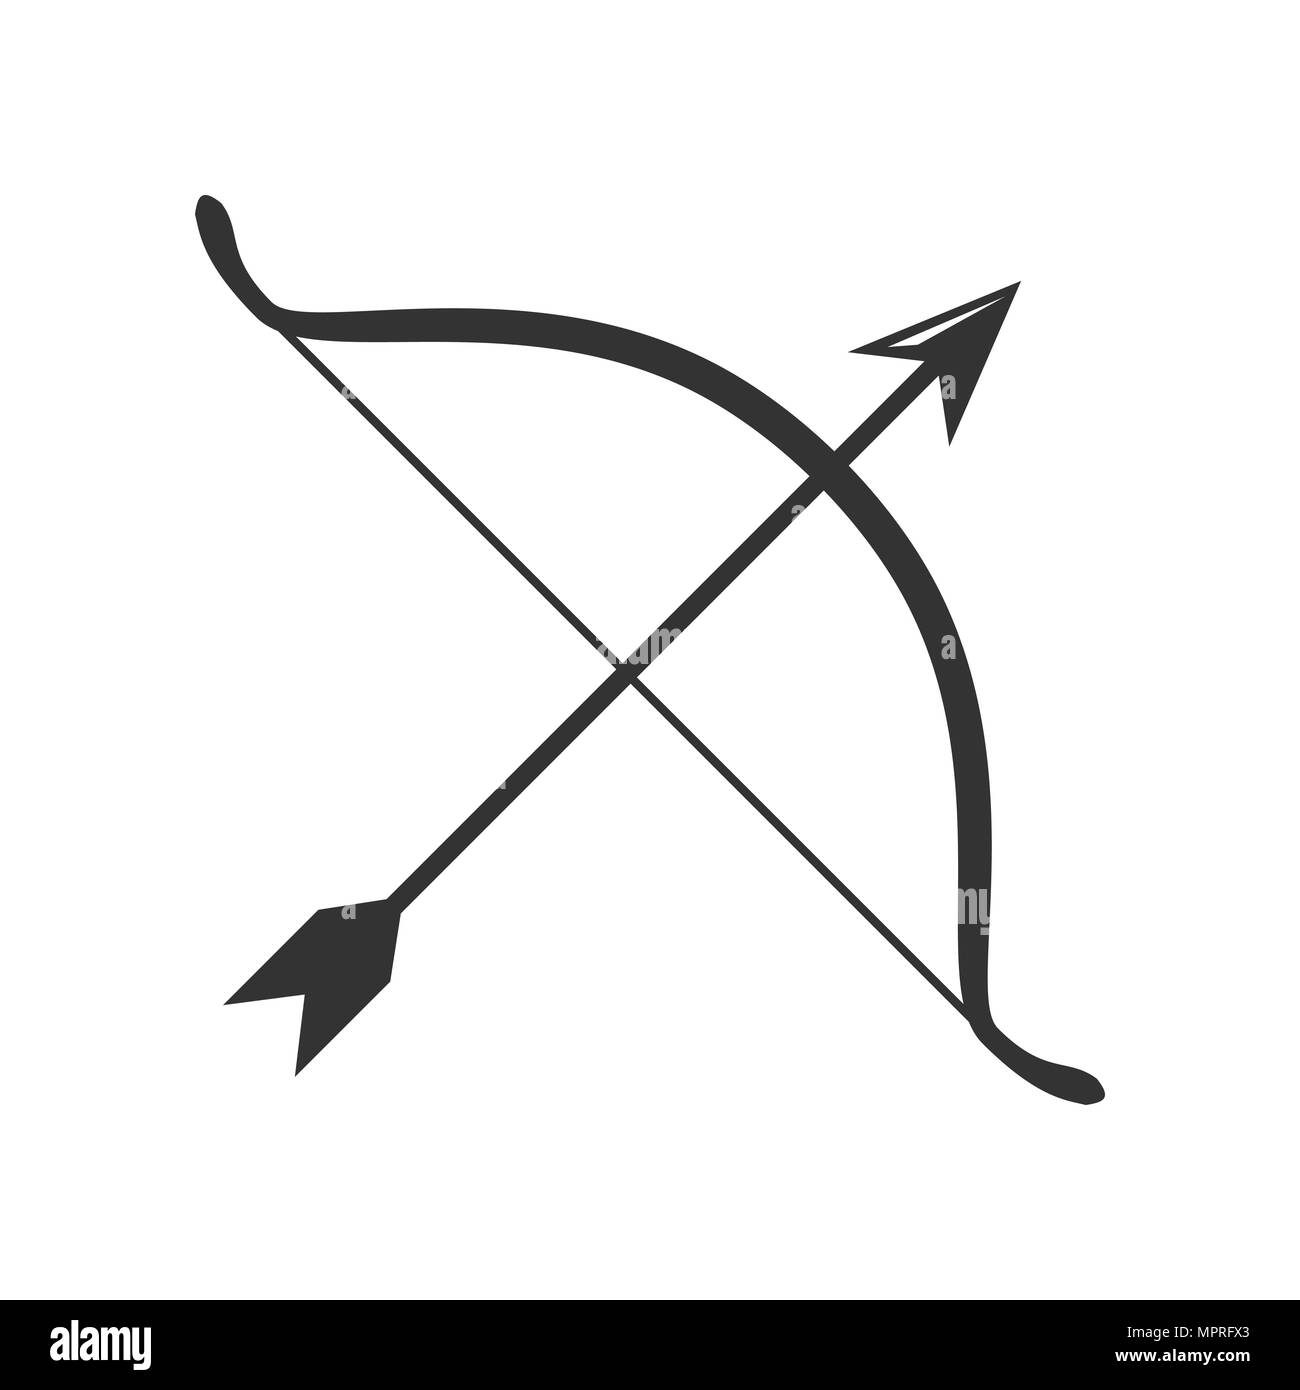 Simple Bow And Arrow Silhouette Vector Symbol Graphic Logo Design Stock Vector